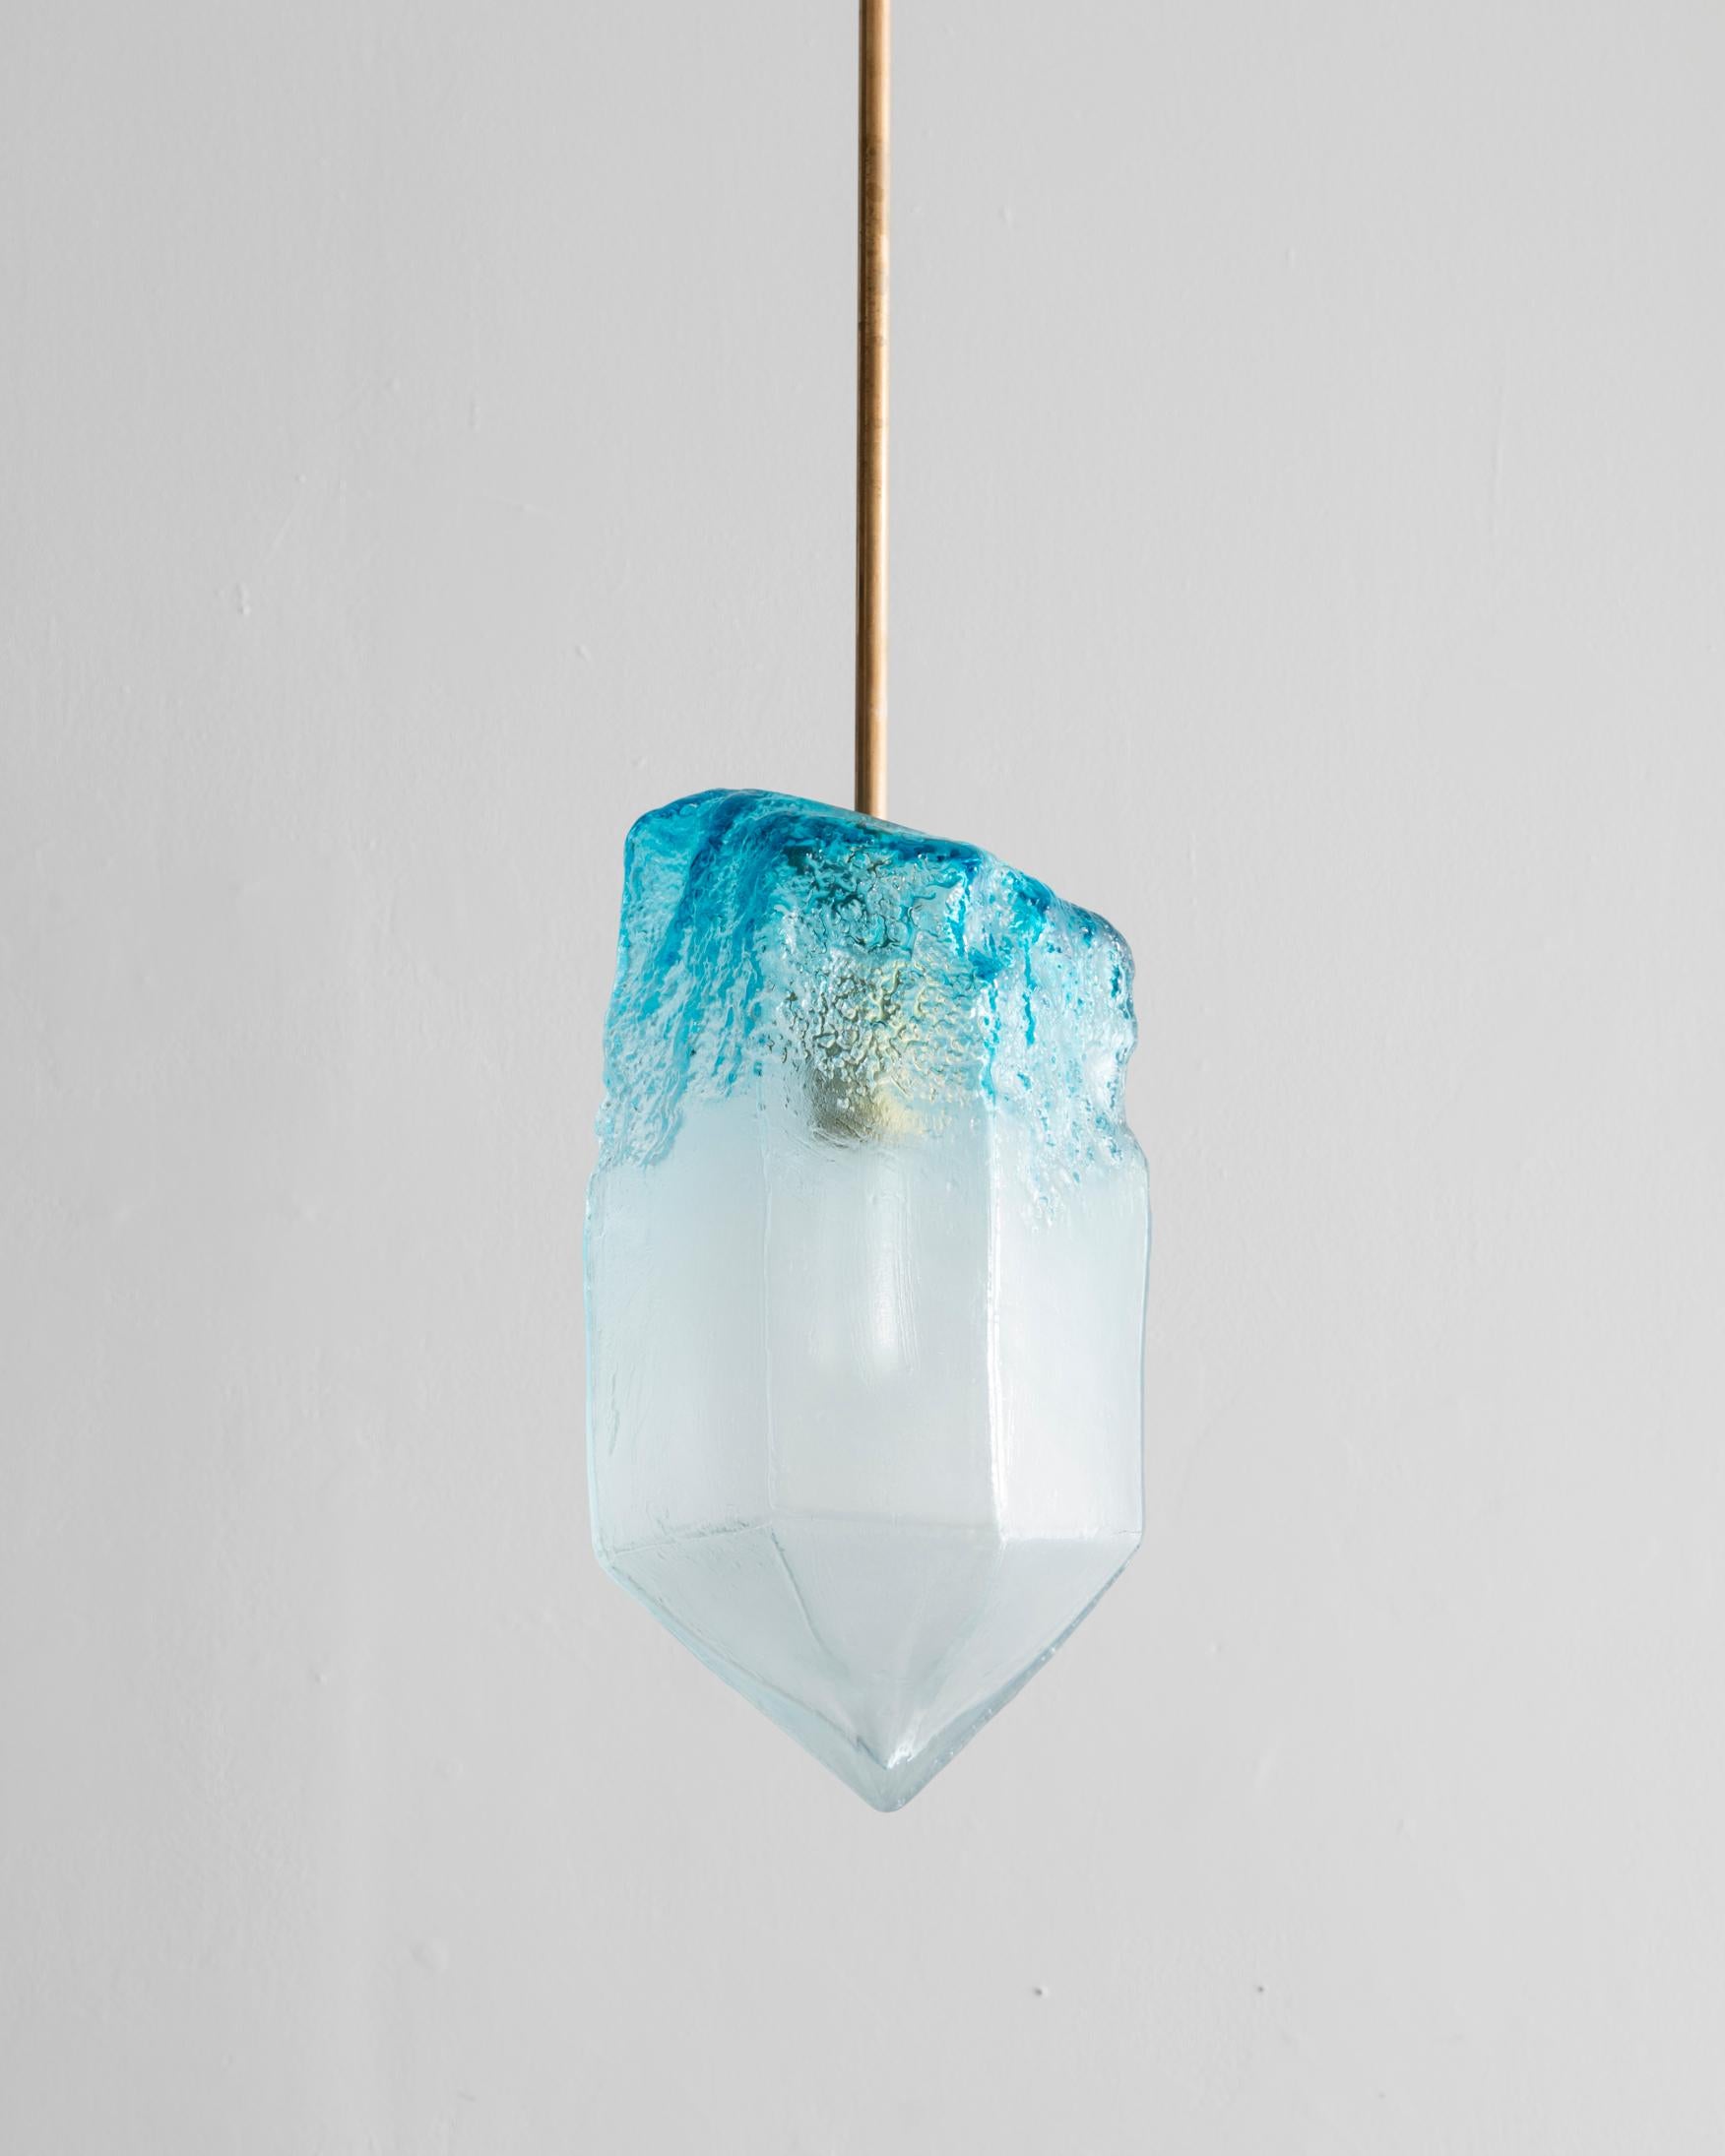 Illuminated hand blown blue glass Crystal pendant with custom nickel-plated hardware. Designed and made by Jeff Zimmerman, USA, 2016.
   